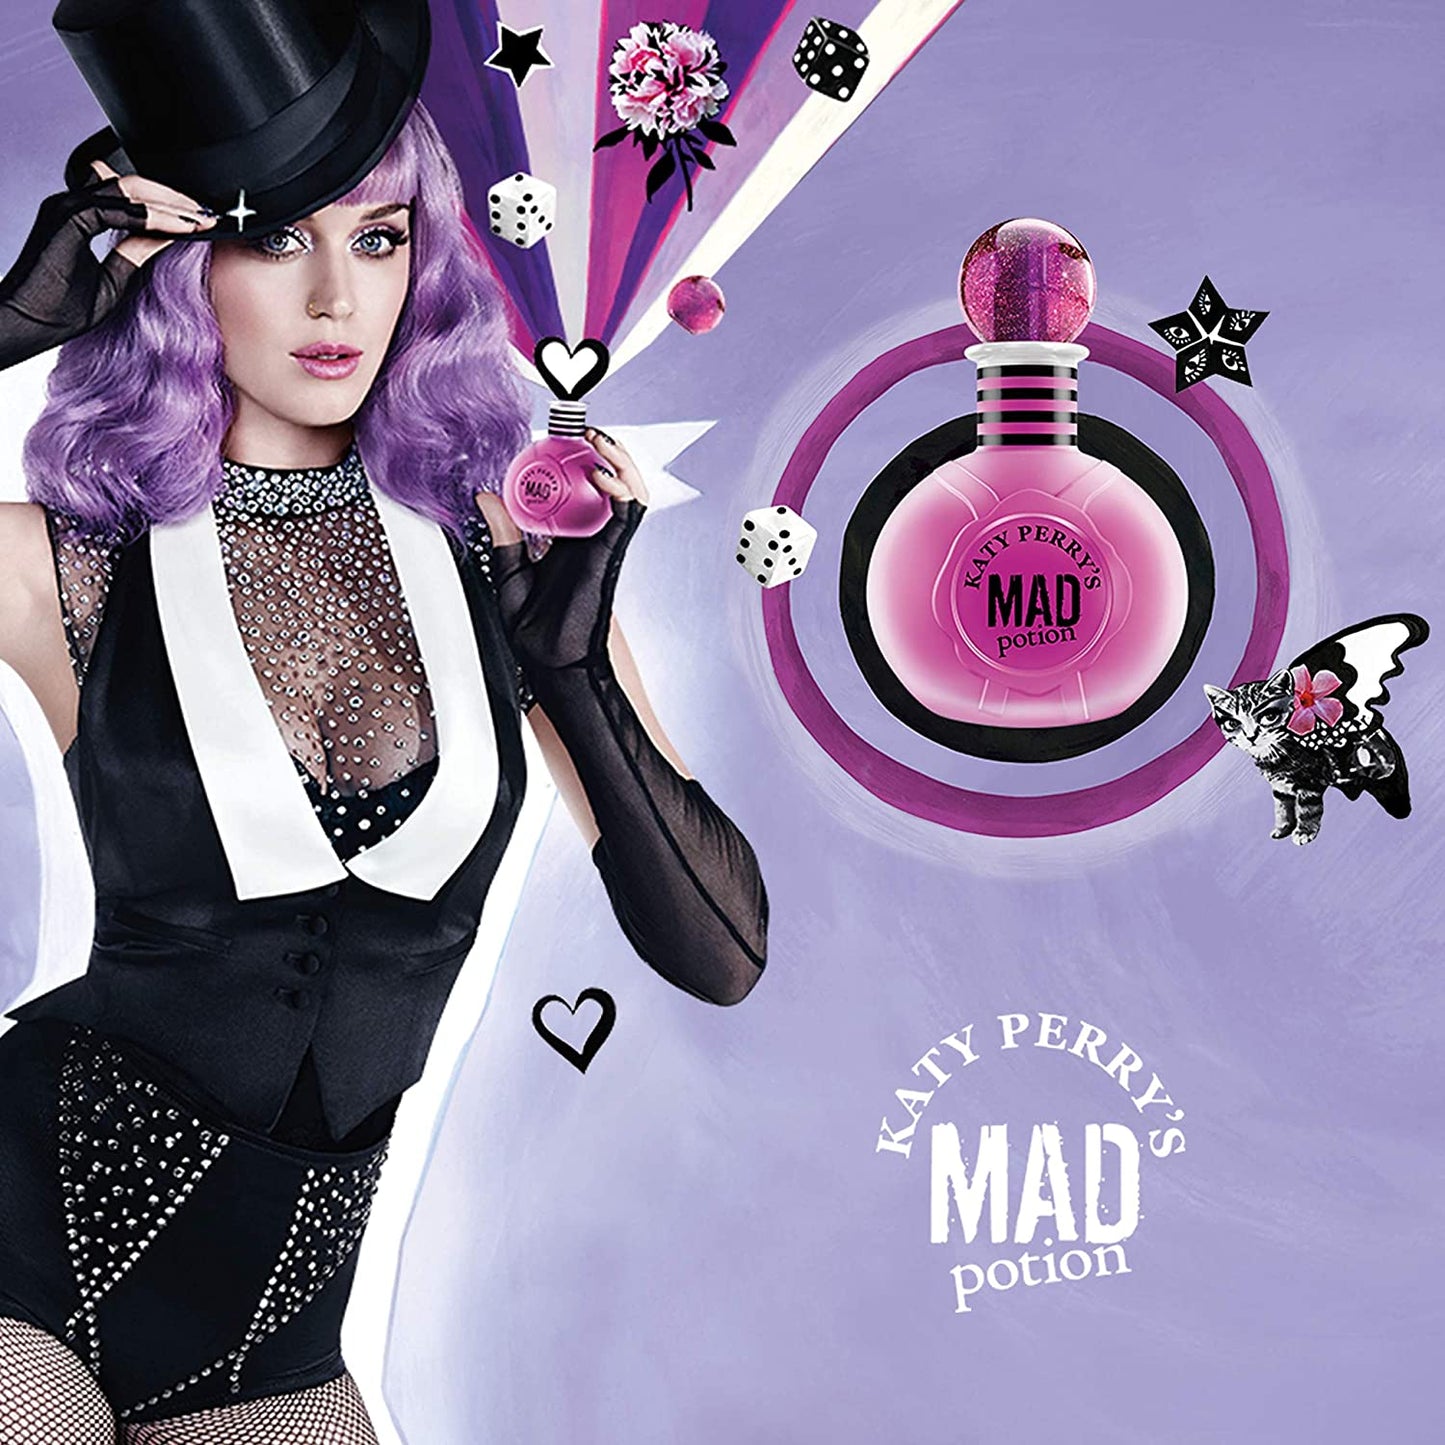 Mad Potion By Katty Perry's 100ML  EDP